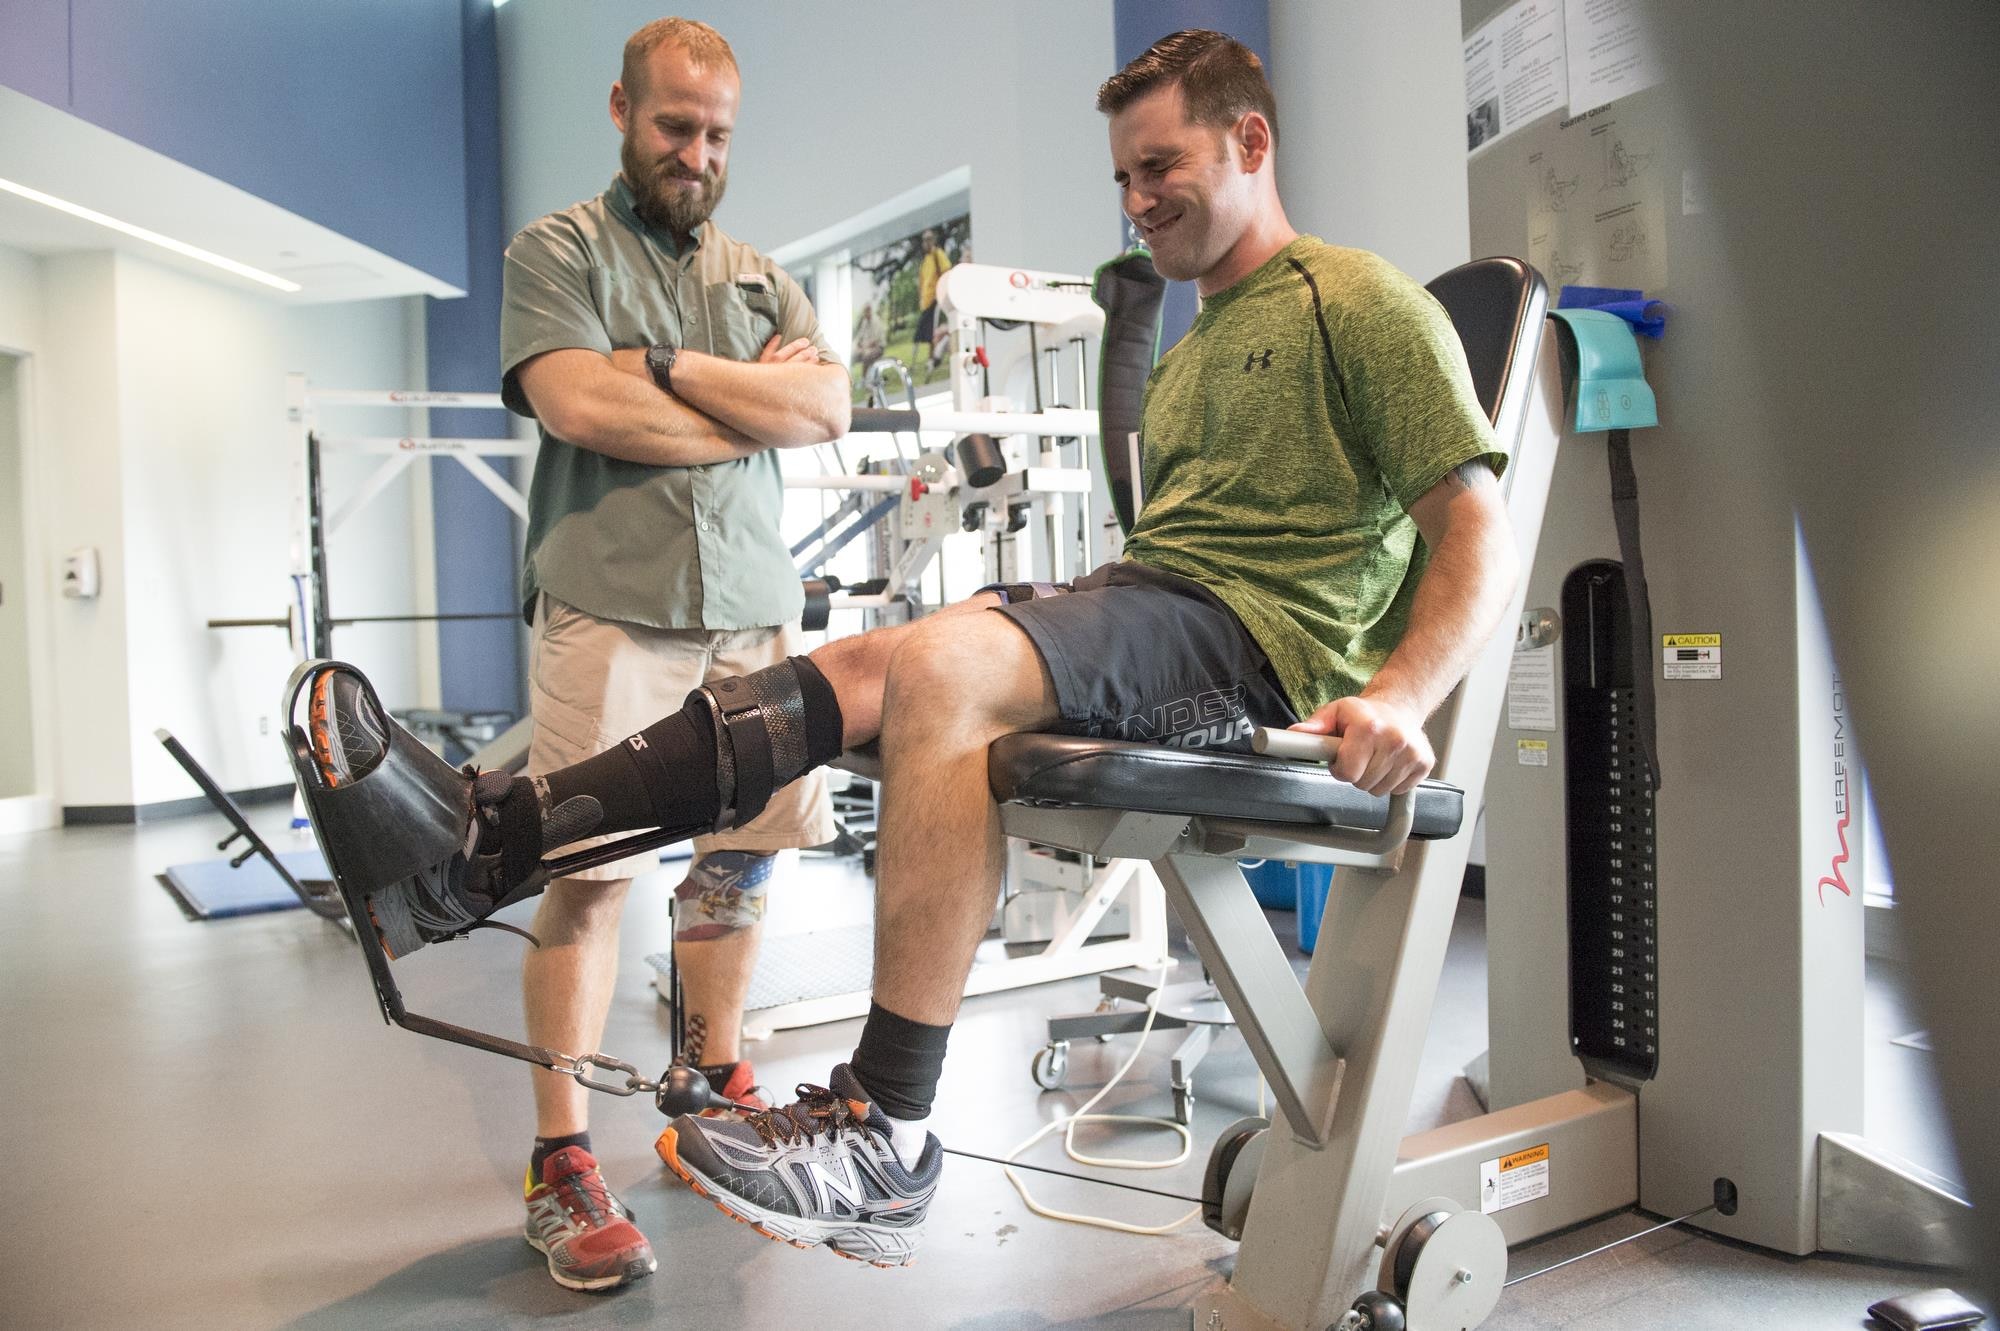 Wayne Strube, a former Air Force security forces patrolman, coaches Army Staff Sgt. Lennis Lebarge as he rehabs his right knee with the Delfi machines BFR tourniquet at the Center for the Intrepid at Fort Sam Houston, Texas, Sept. 13, 2016. The BFR tourniquet reduces blood flowing from the specific body part and expedites the healing process. Strube currently serves military service members as the CFI physical therapist in charge of the Return to Run program at San Antonio Medical Center, Texas. The CFI Return to Run program is currently servicing active-duty service members and some civilians that have been injured in accidents. (U.S. Air Force photo/Tech Sgt. Vernon Young Jr.)